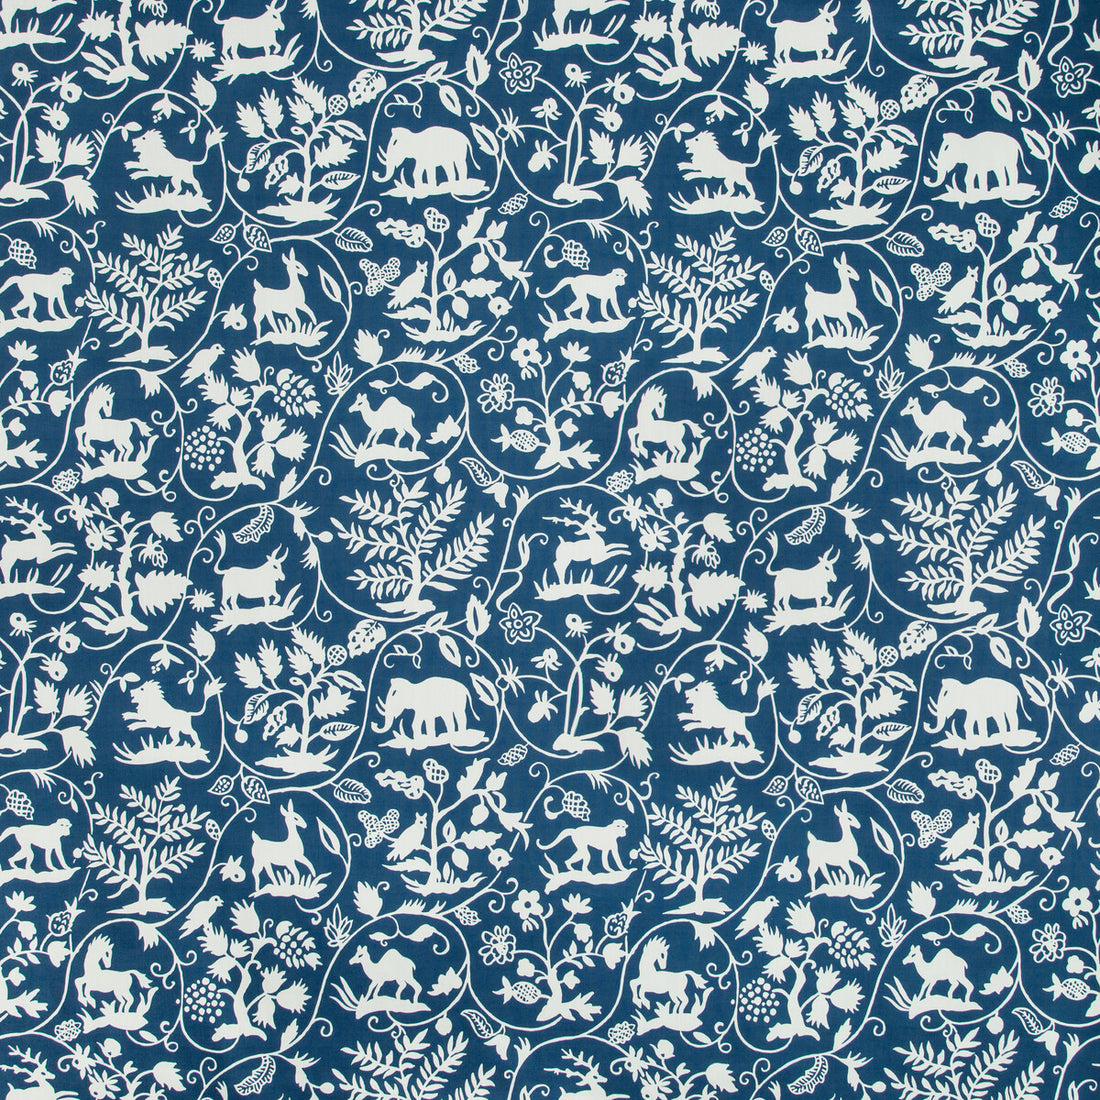 Animaltale fabric in marine color - pattern ANIMALTALE.5.0 - by Kravet Basics in the Bermuda collection